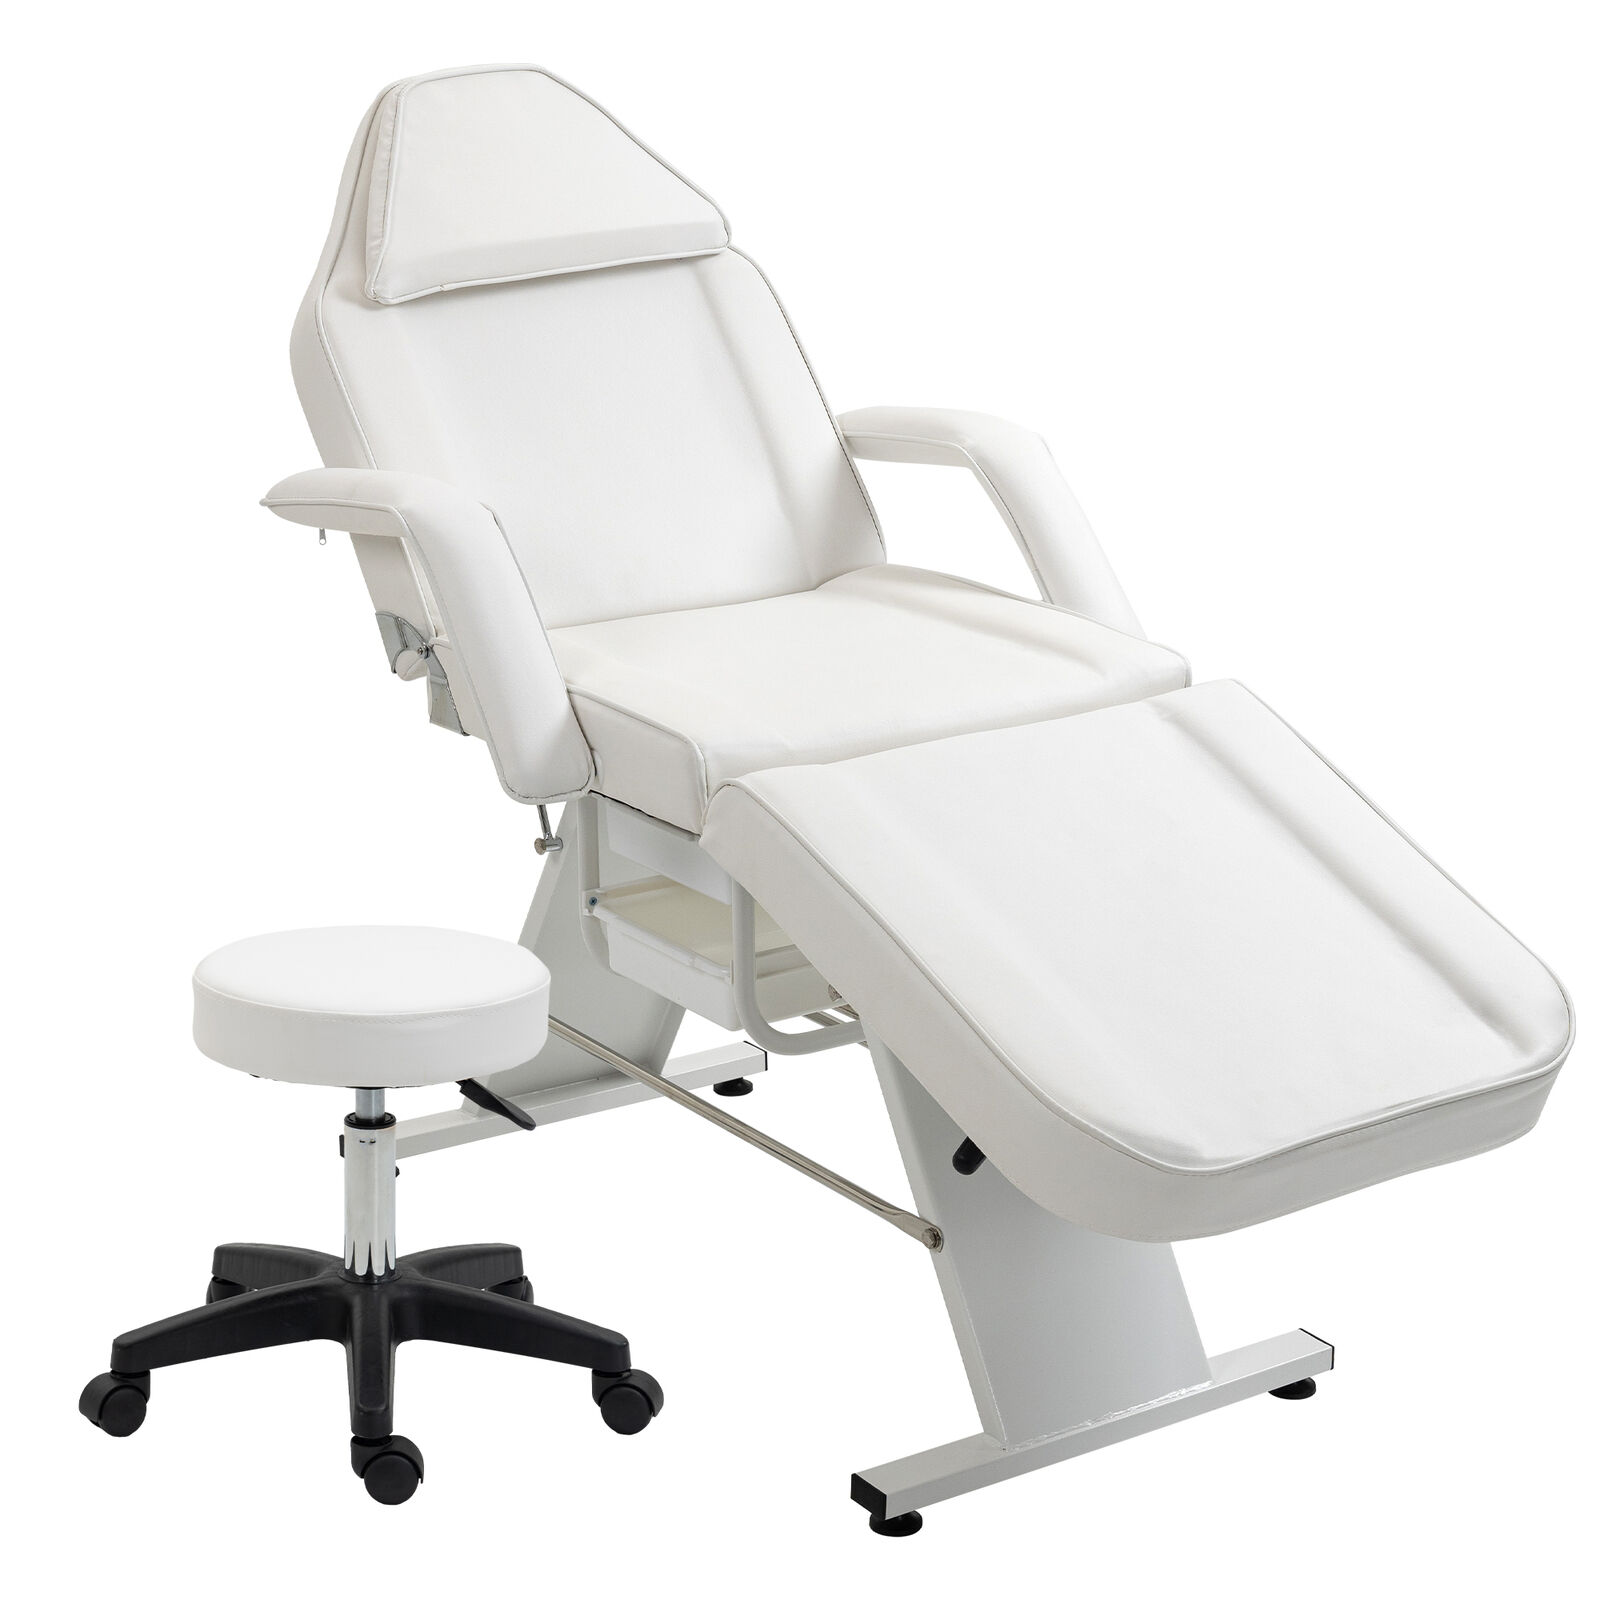 Massage Salon Tattoo Chair Multi-Purpose 3-Section Facial Bed Table Unbranded